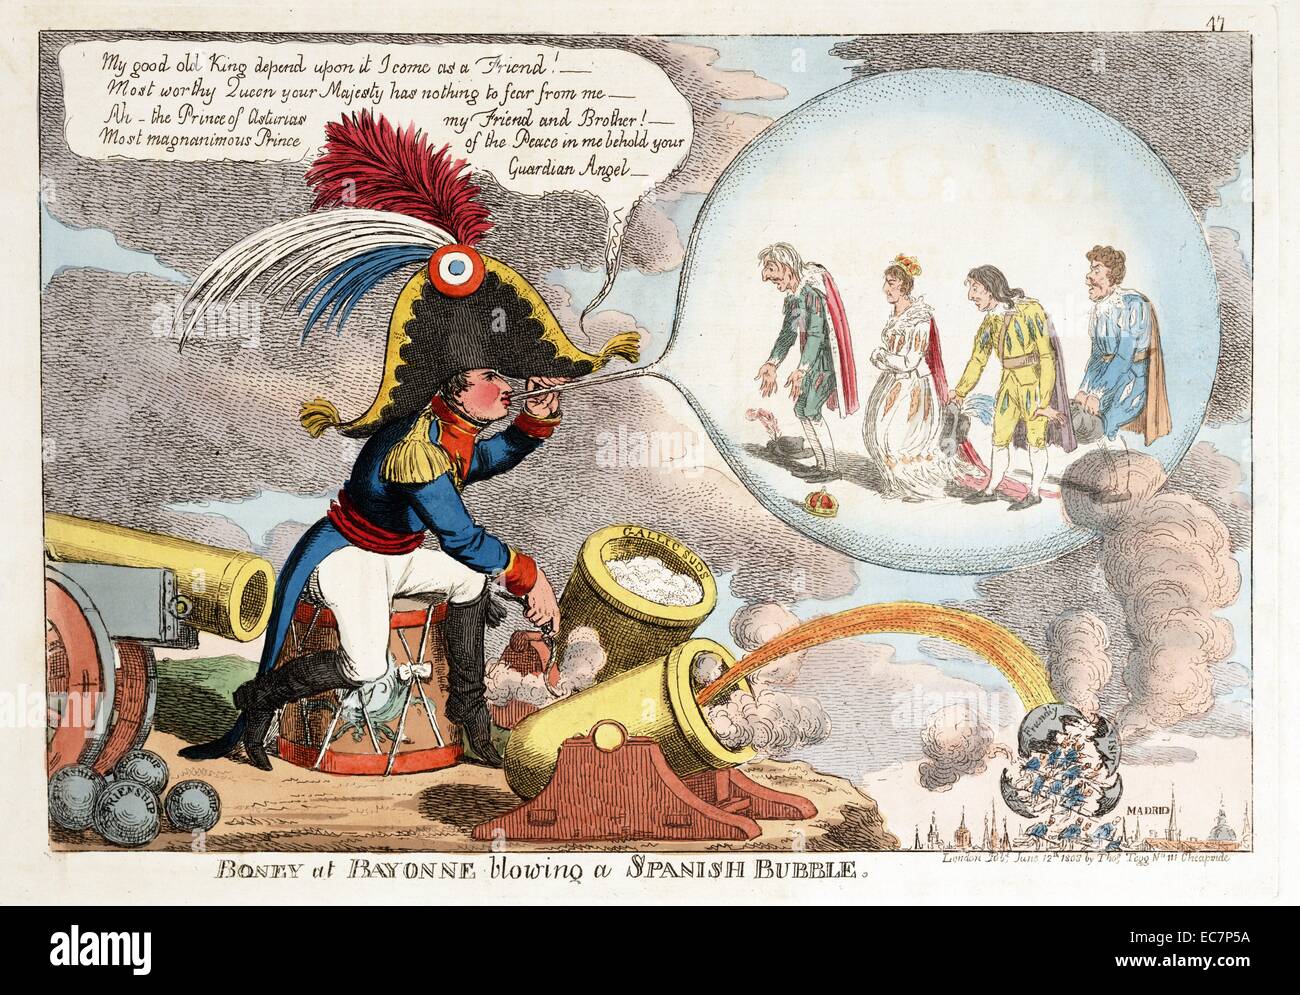 Boney at Bayonne blowing a Spanish bubble. Print shows Napoleon convincing the Spanish royalty, who are enclosed in a bubble, of his friendship as he fires a cannonball at Madrid. Stock Photo